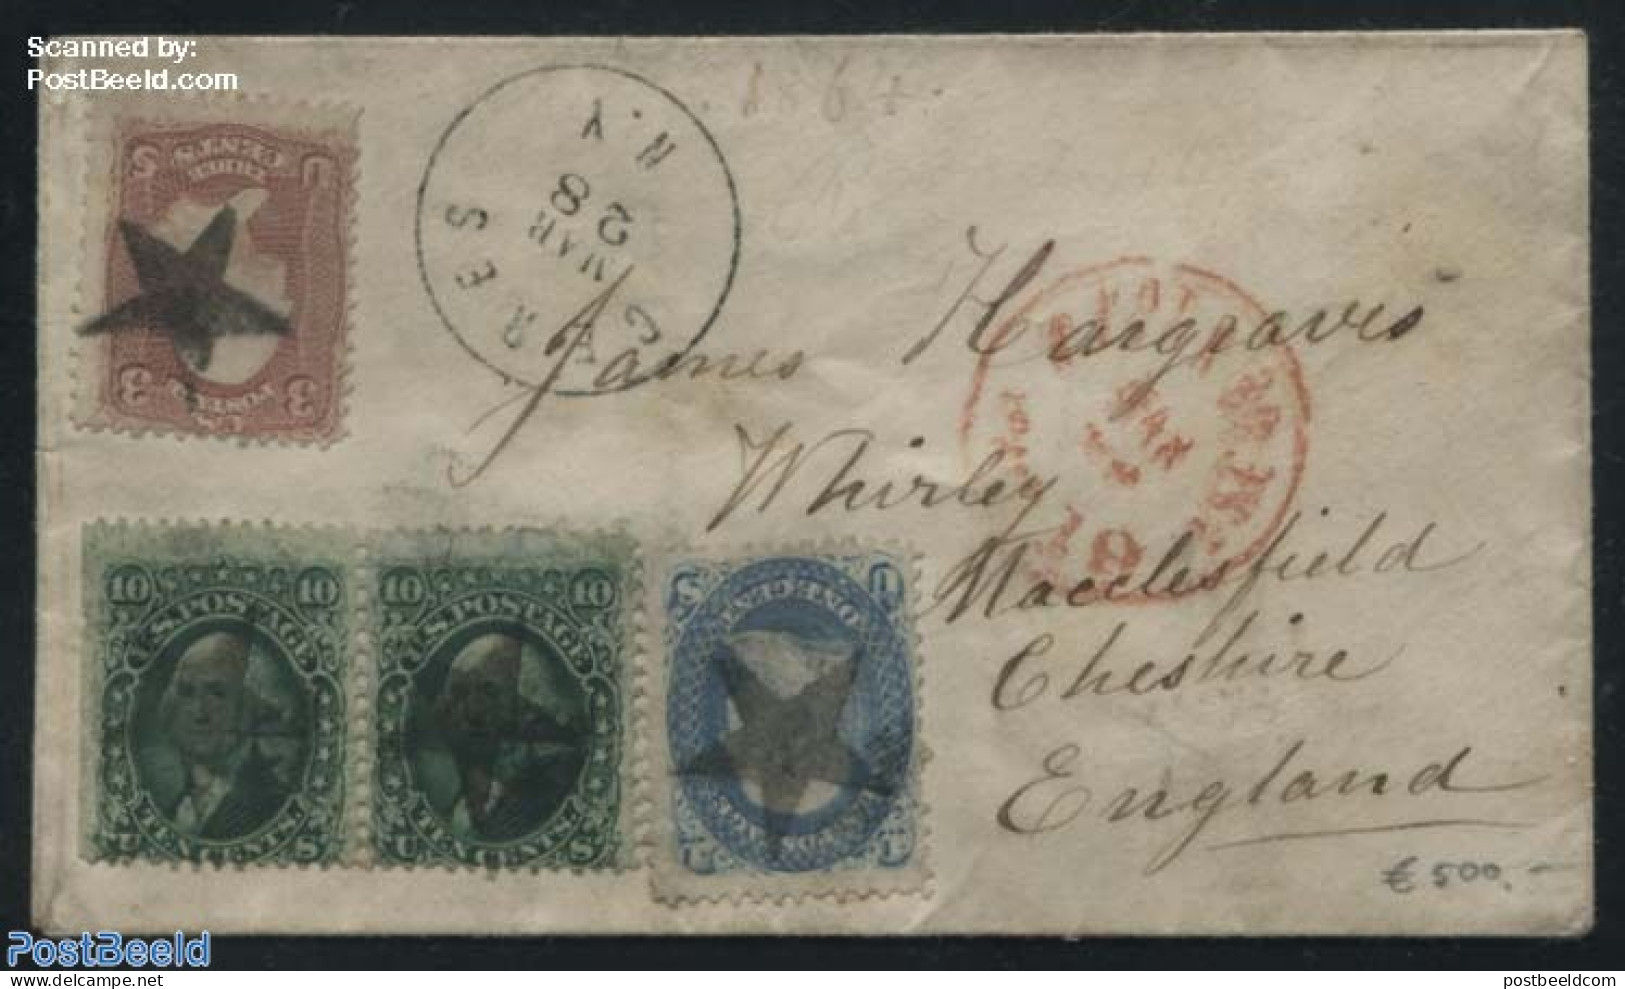 United States Of America 1864 Letter To Macclesfield England, Postal History - Covers & Documents